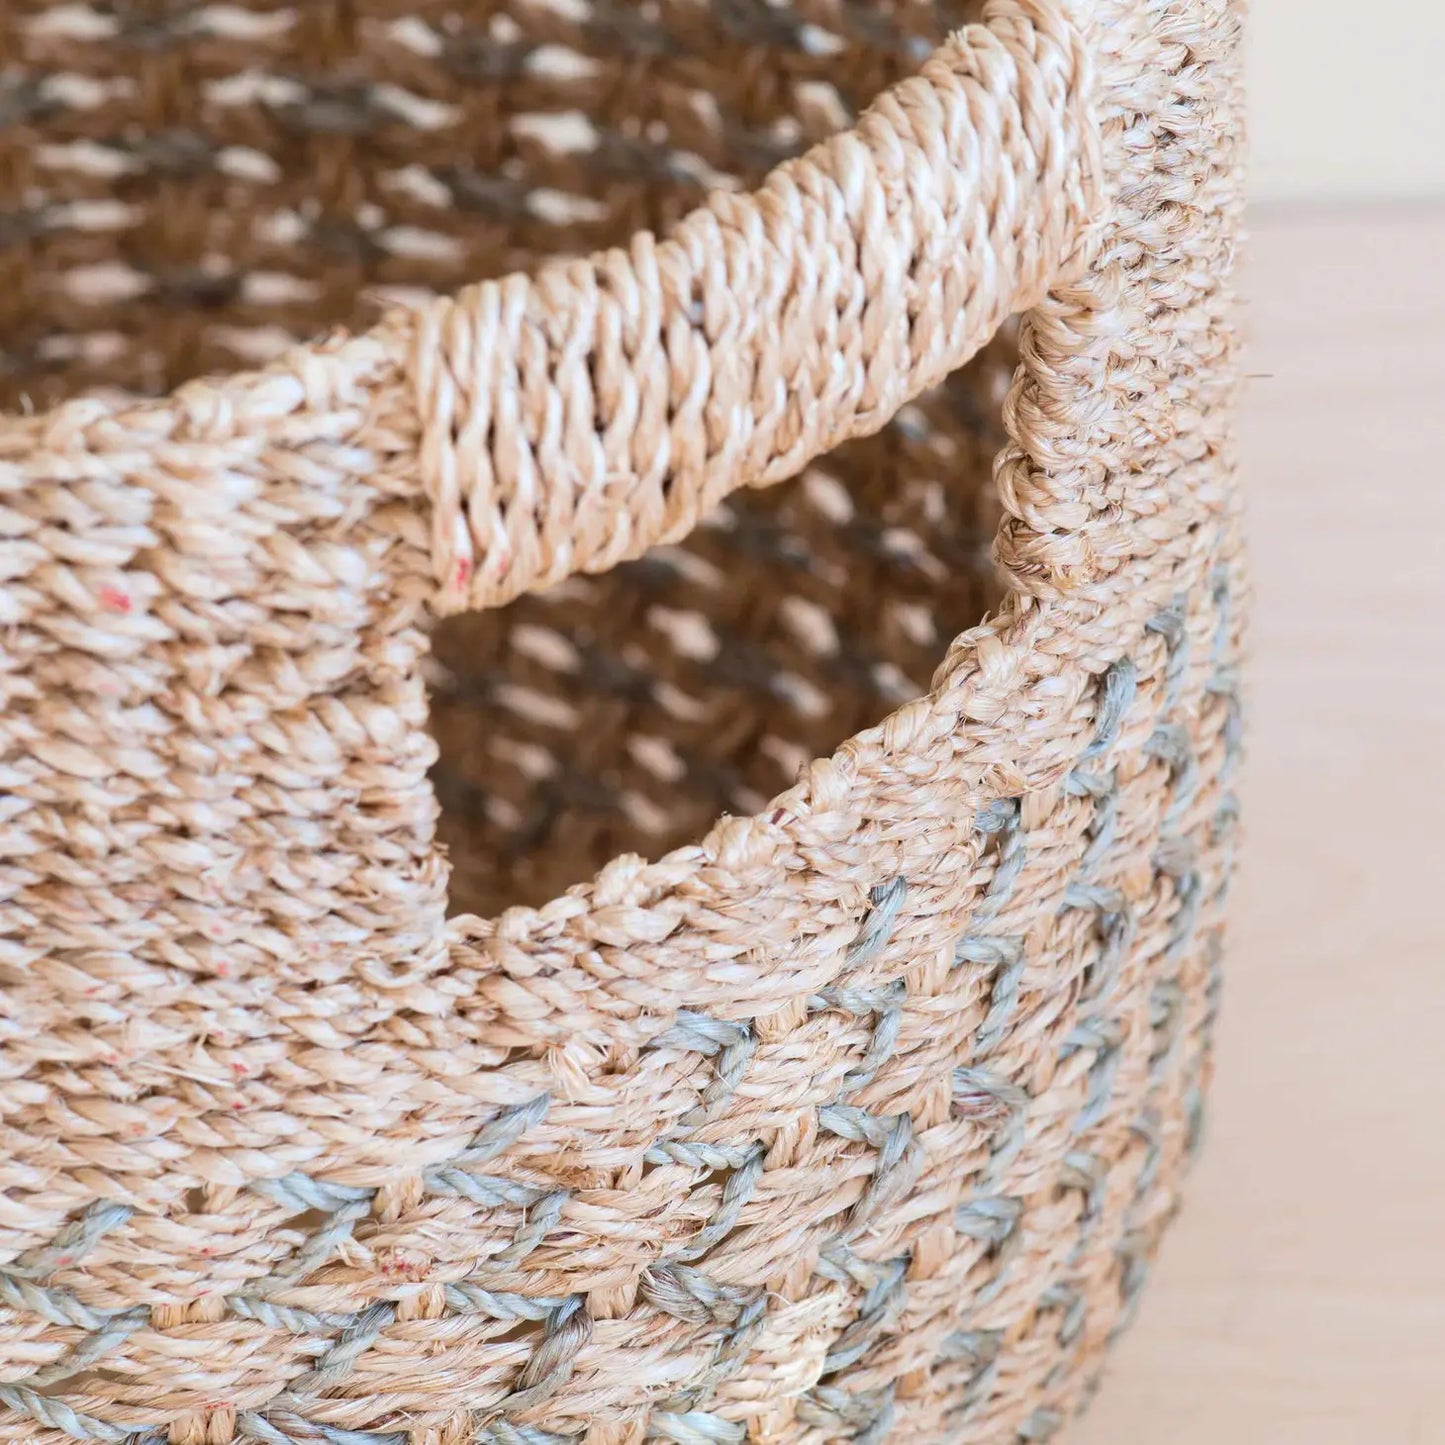 Grey Patterned Round Woven Basket